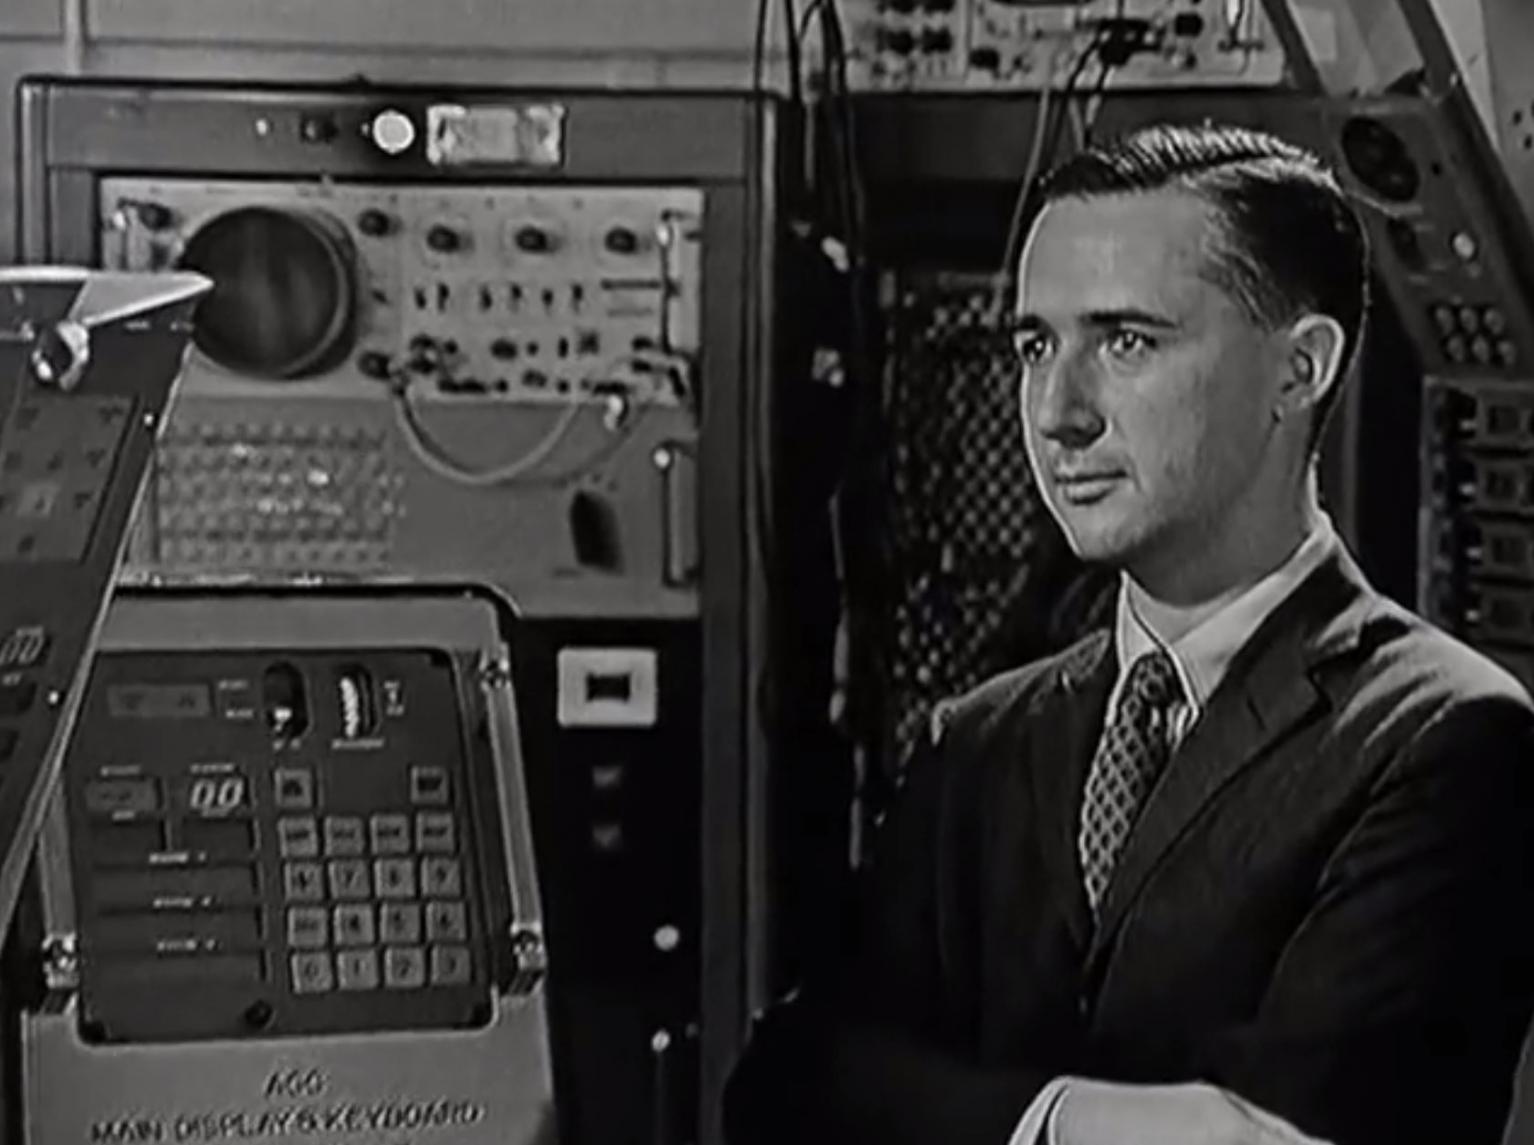 Ramon Alonso with Apollo Guidance Computer in MIT Film